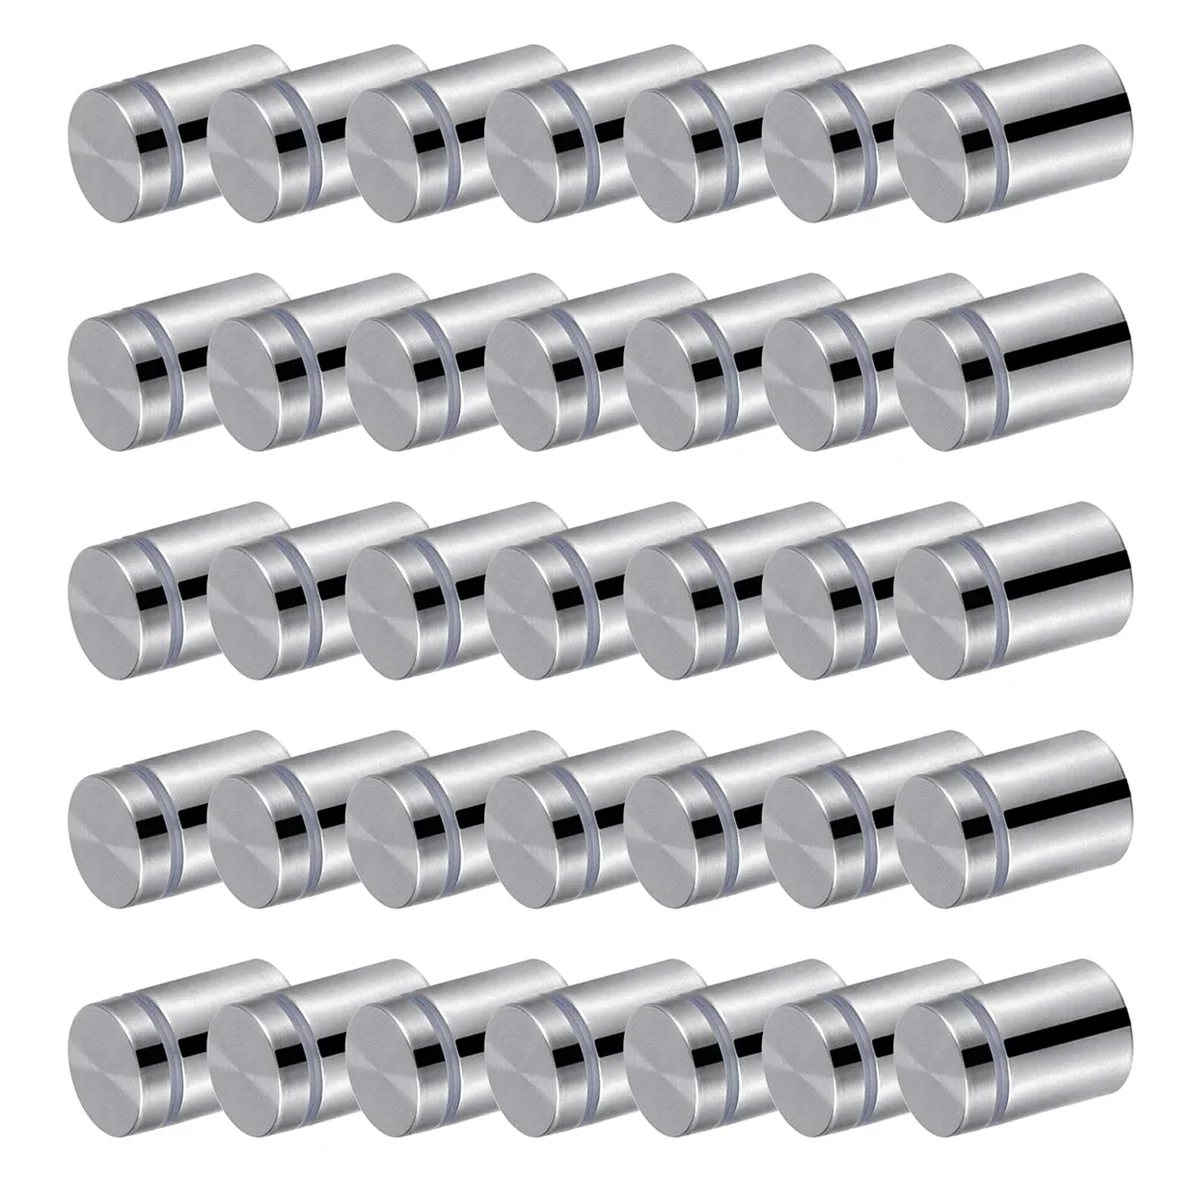 

40 Pcs Advertising Screw Wall Standoff Mounts Stainless Steel Nails Sign Glass Acrylic